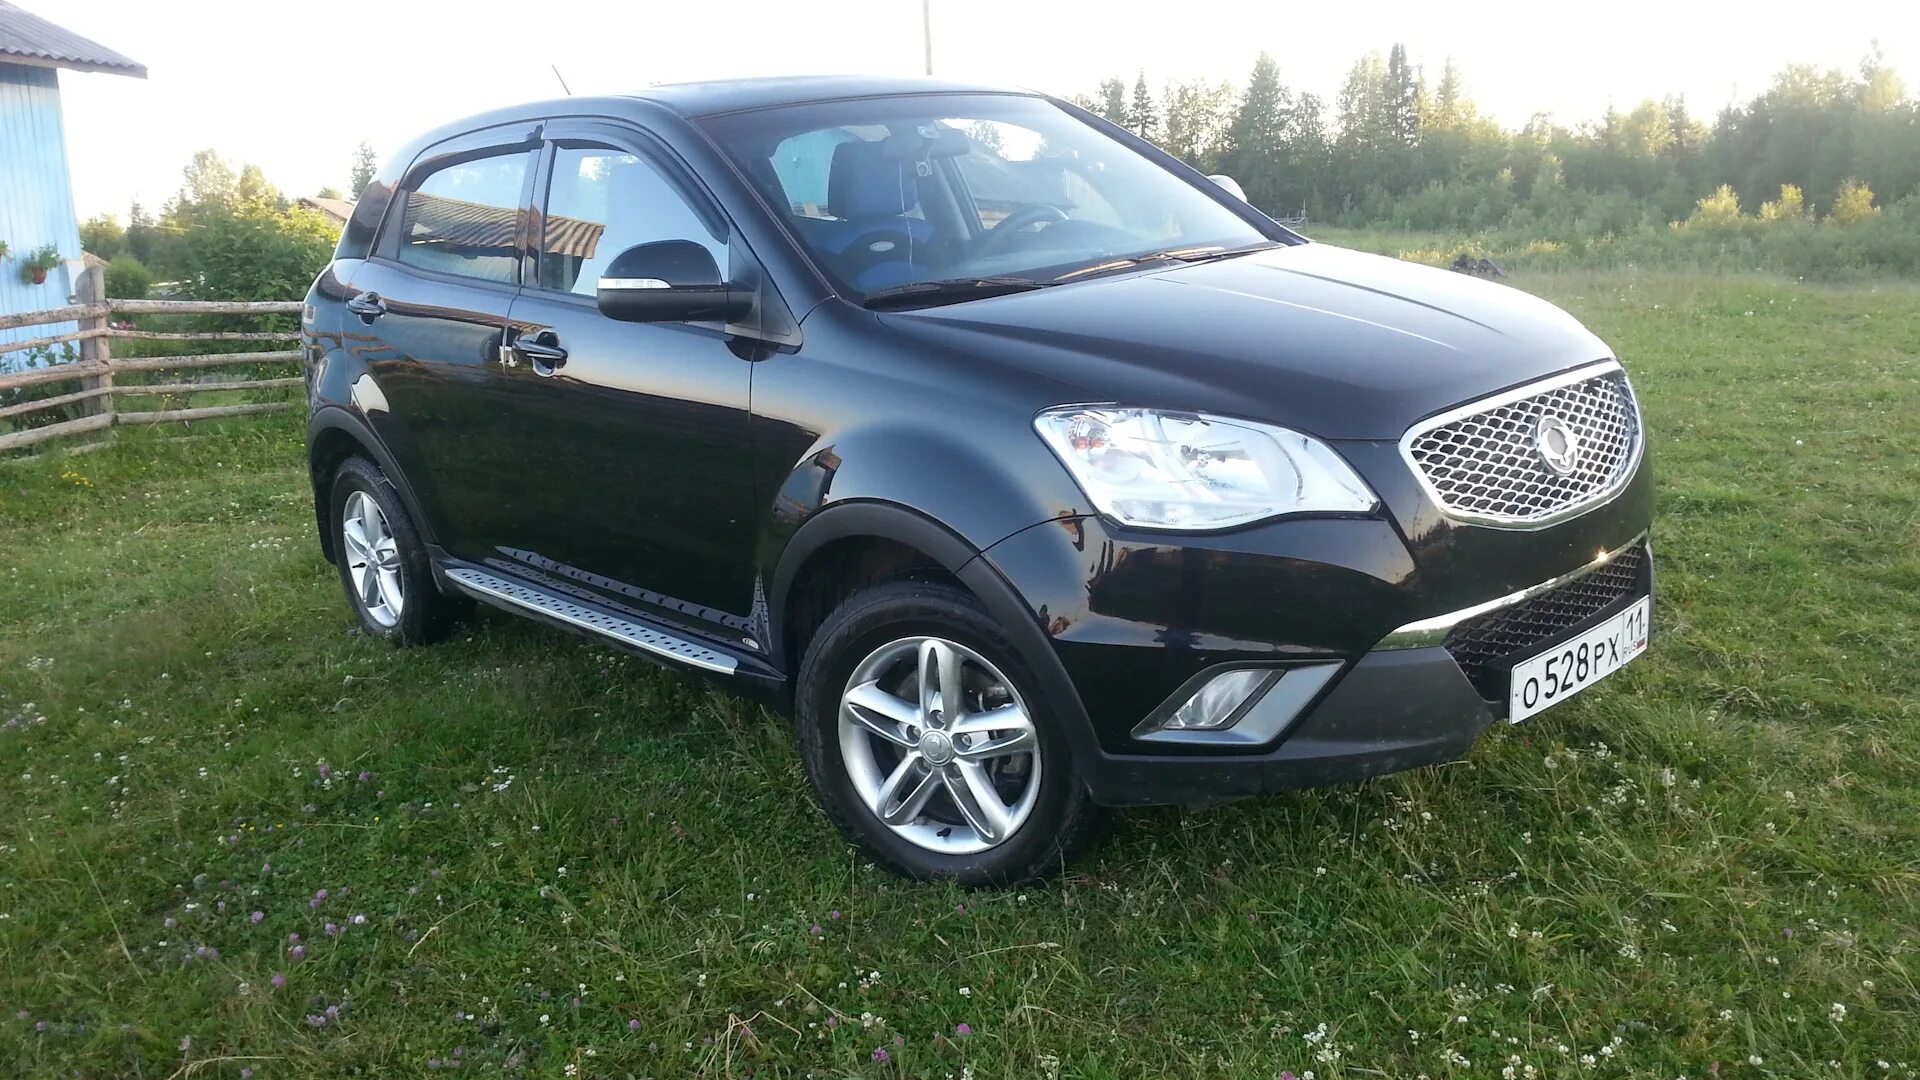 SSANGYONG Actyon (2g). Санг енг Актион 2. Саньенг Актион 2013 2.0 дизель. SSANGYONG Actyon Elegance.